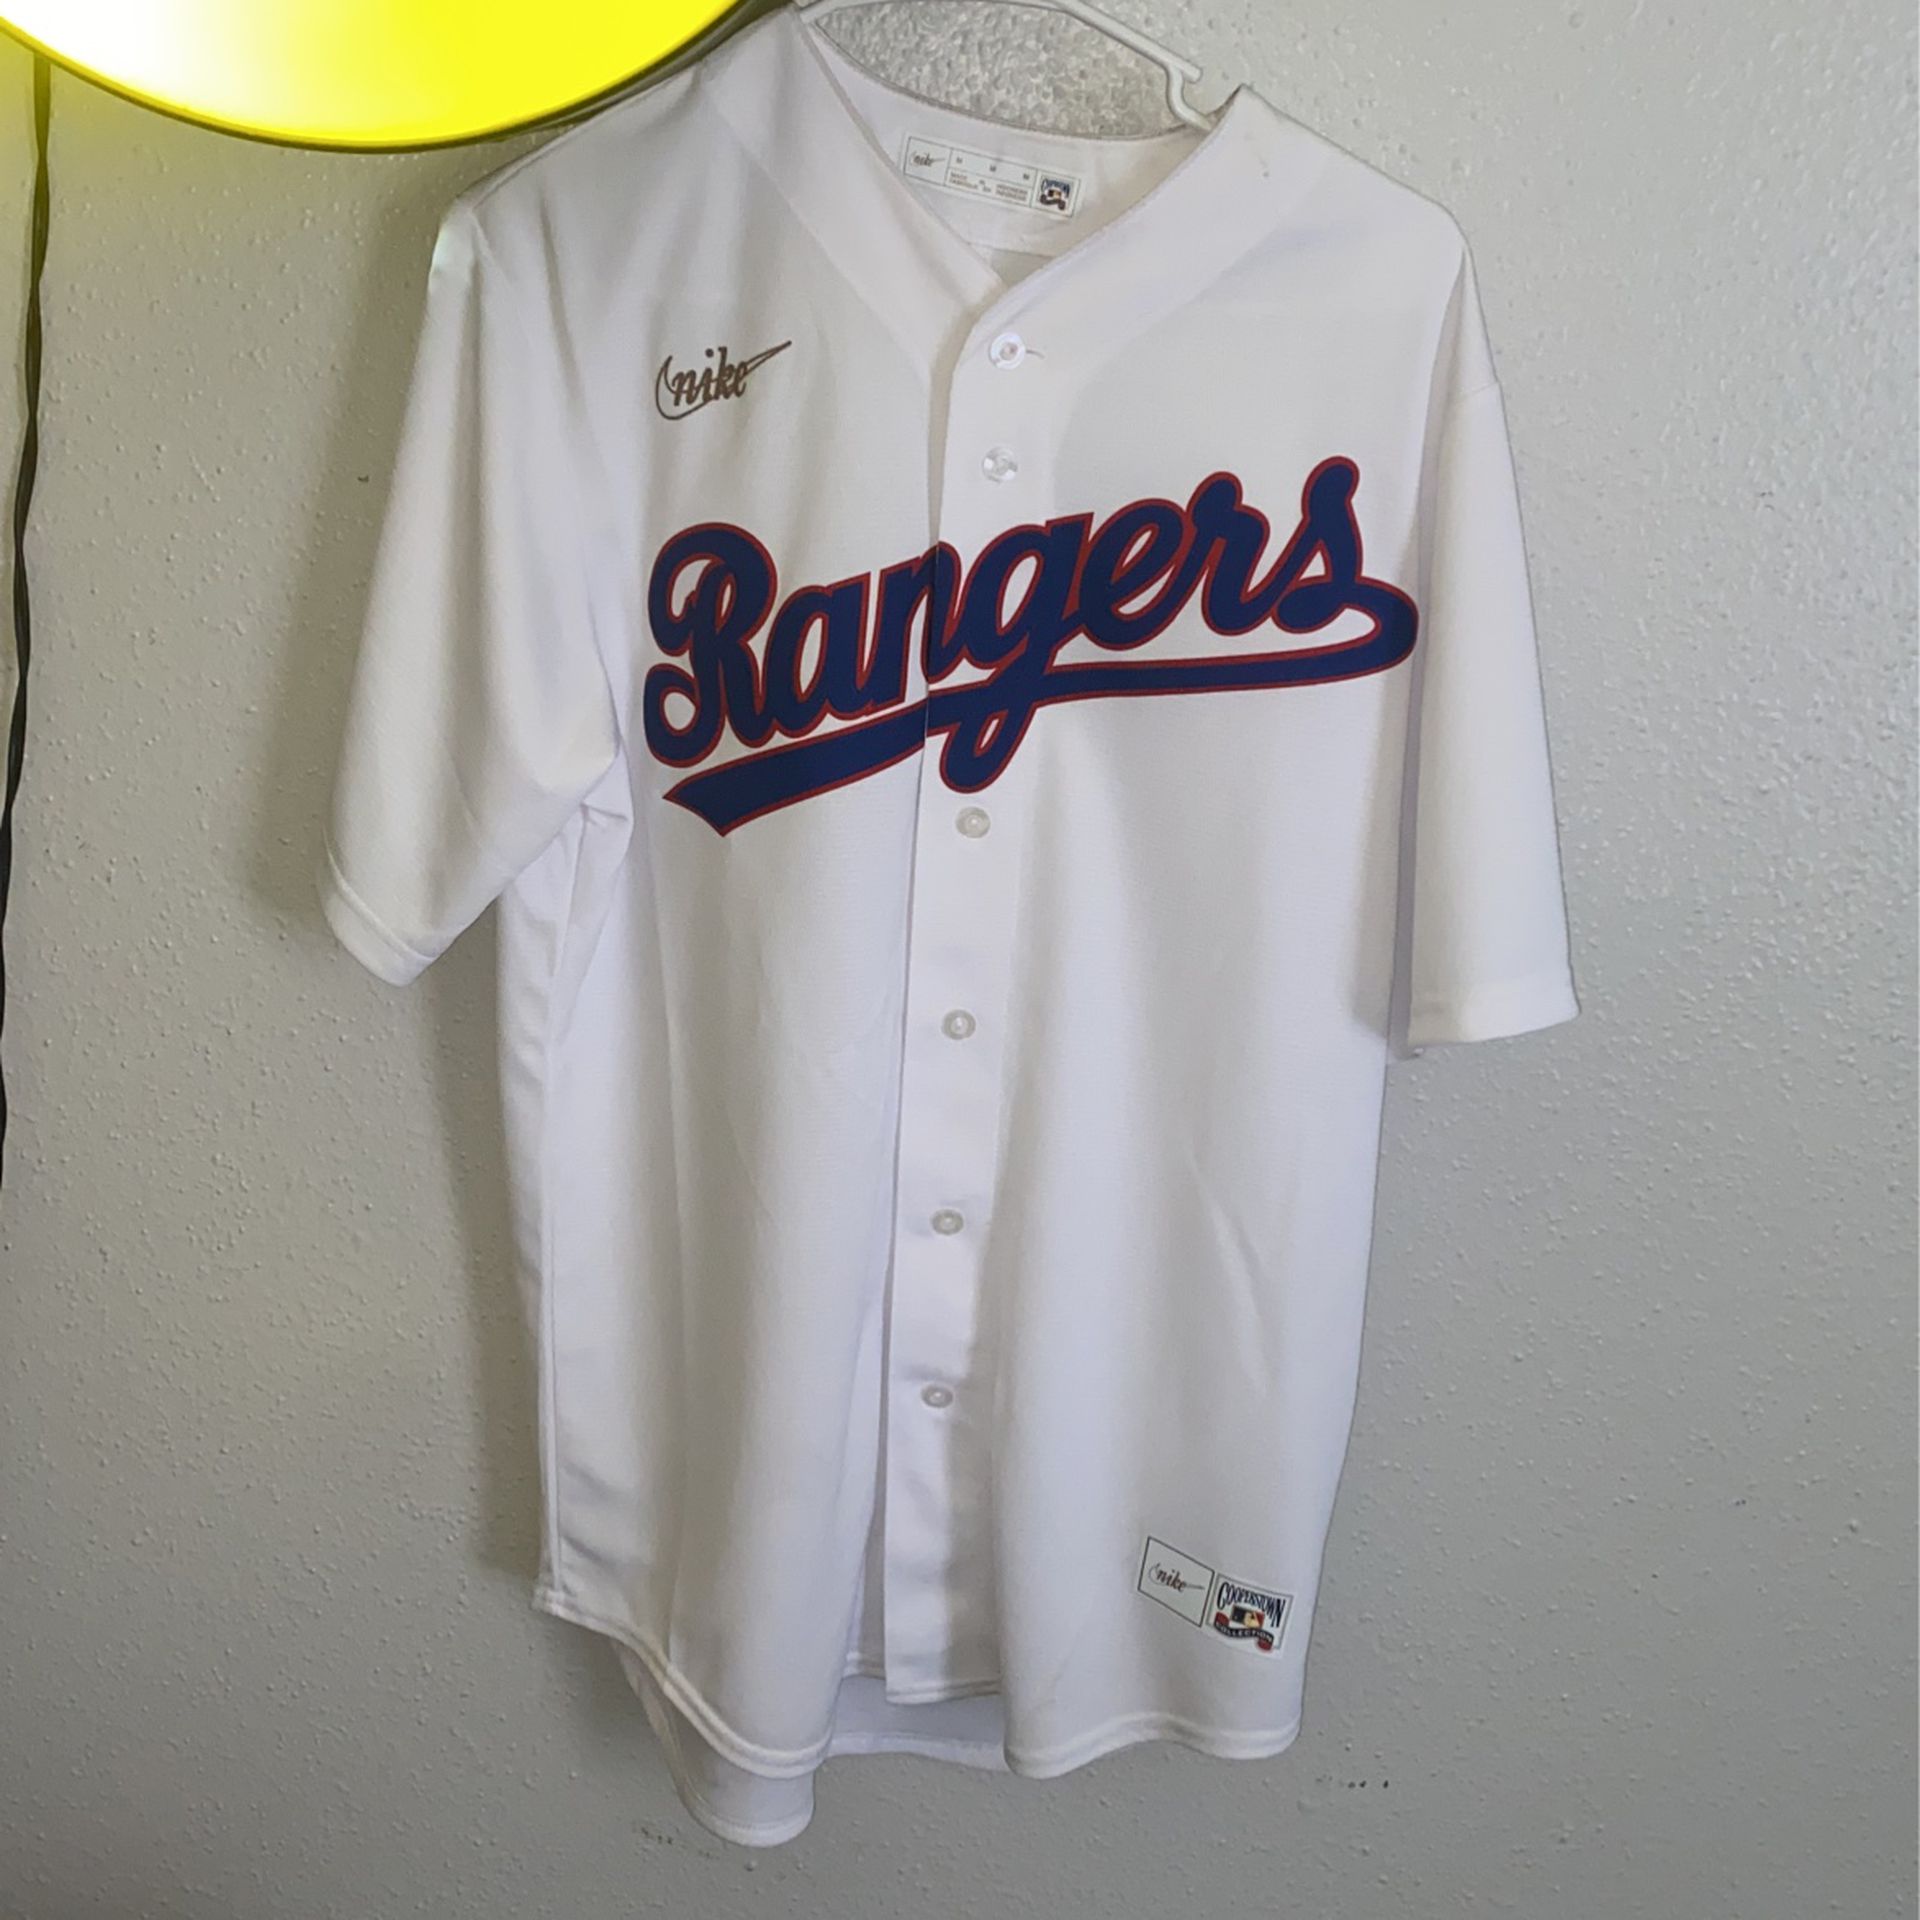 Nike Texas Rangers Jersey for Sale in Alamo Heights, TX - OfferUp